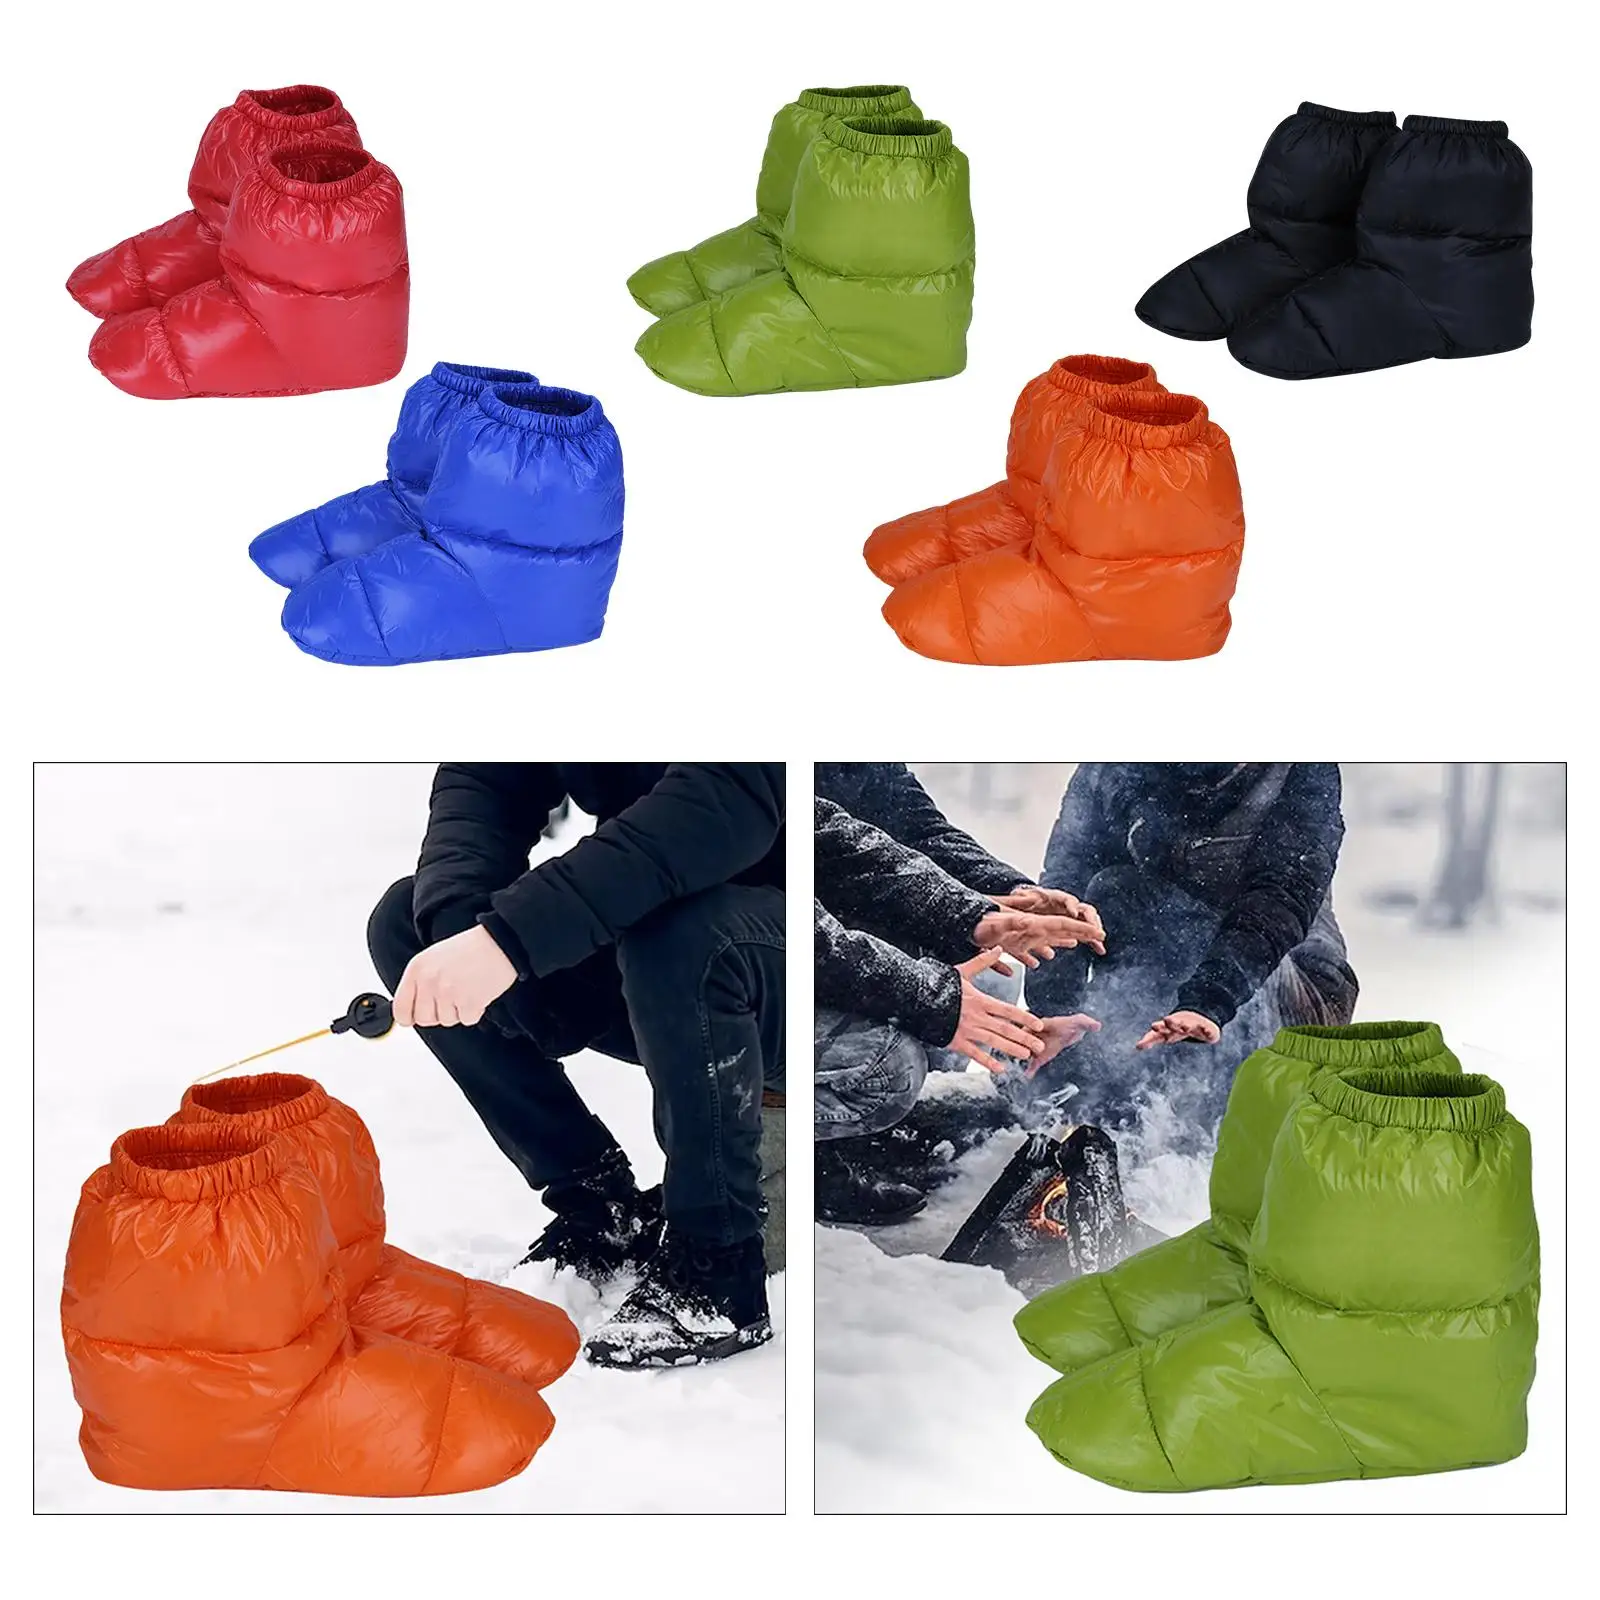 1 Pair Winter Down Slippers Bootie Shoes Camp Tent Women Men Feet Cover Socks Footwear for Fishing Bedroom Office Camping Hiking